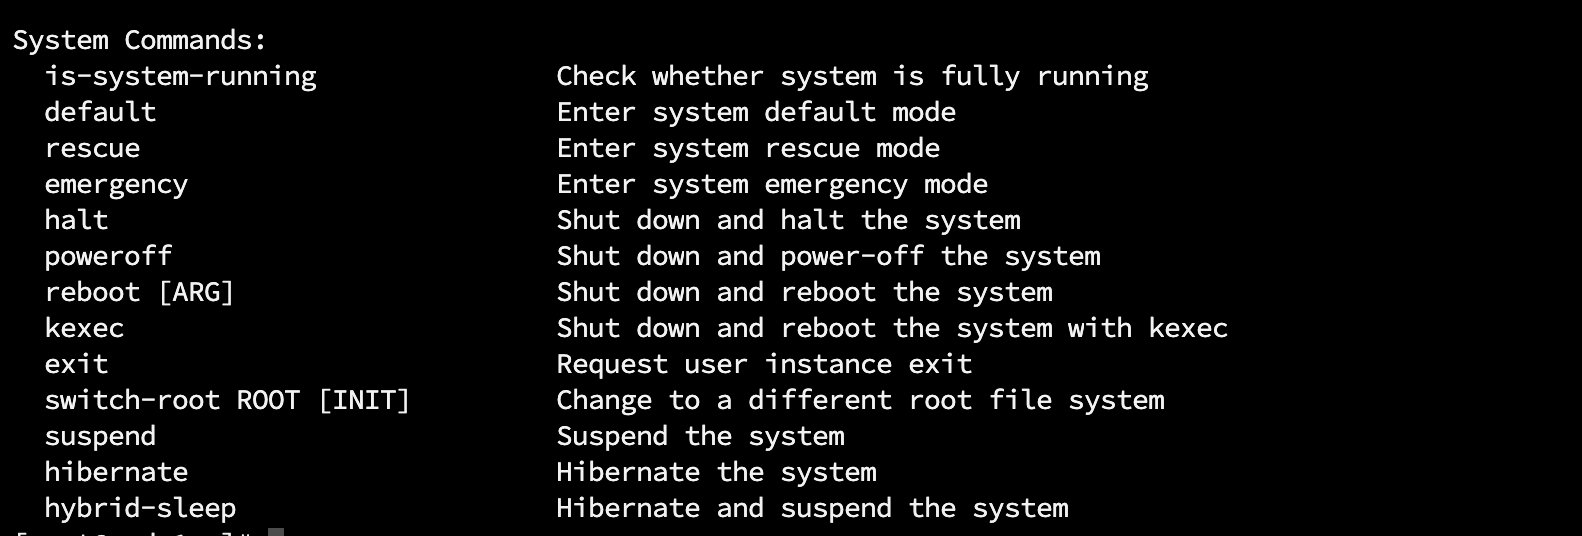 systemd system commands